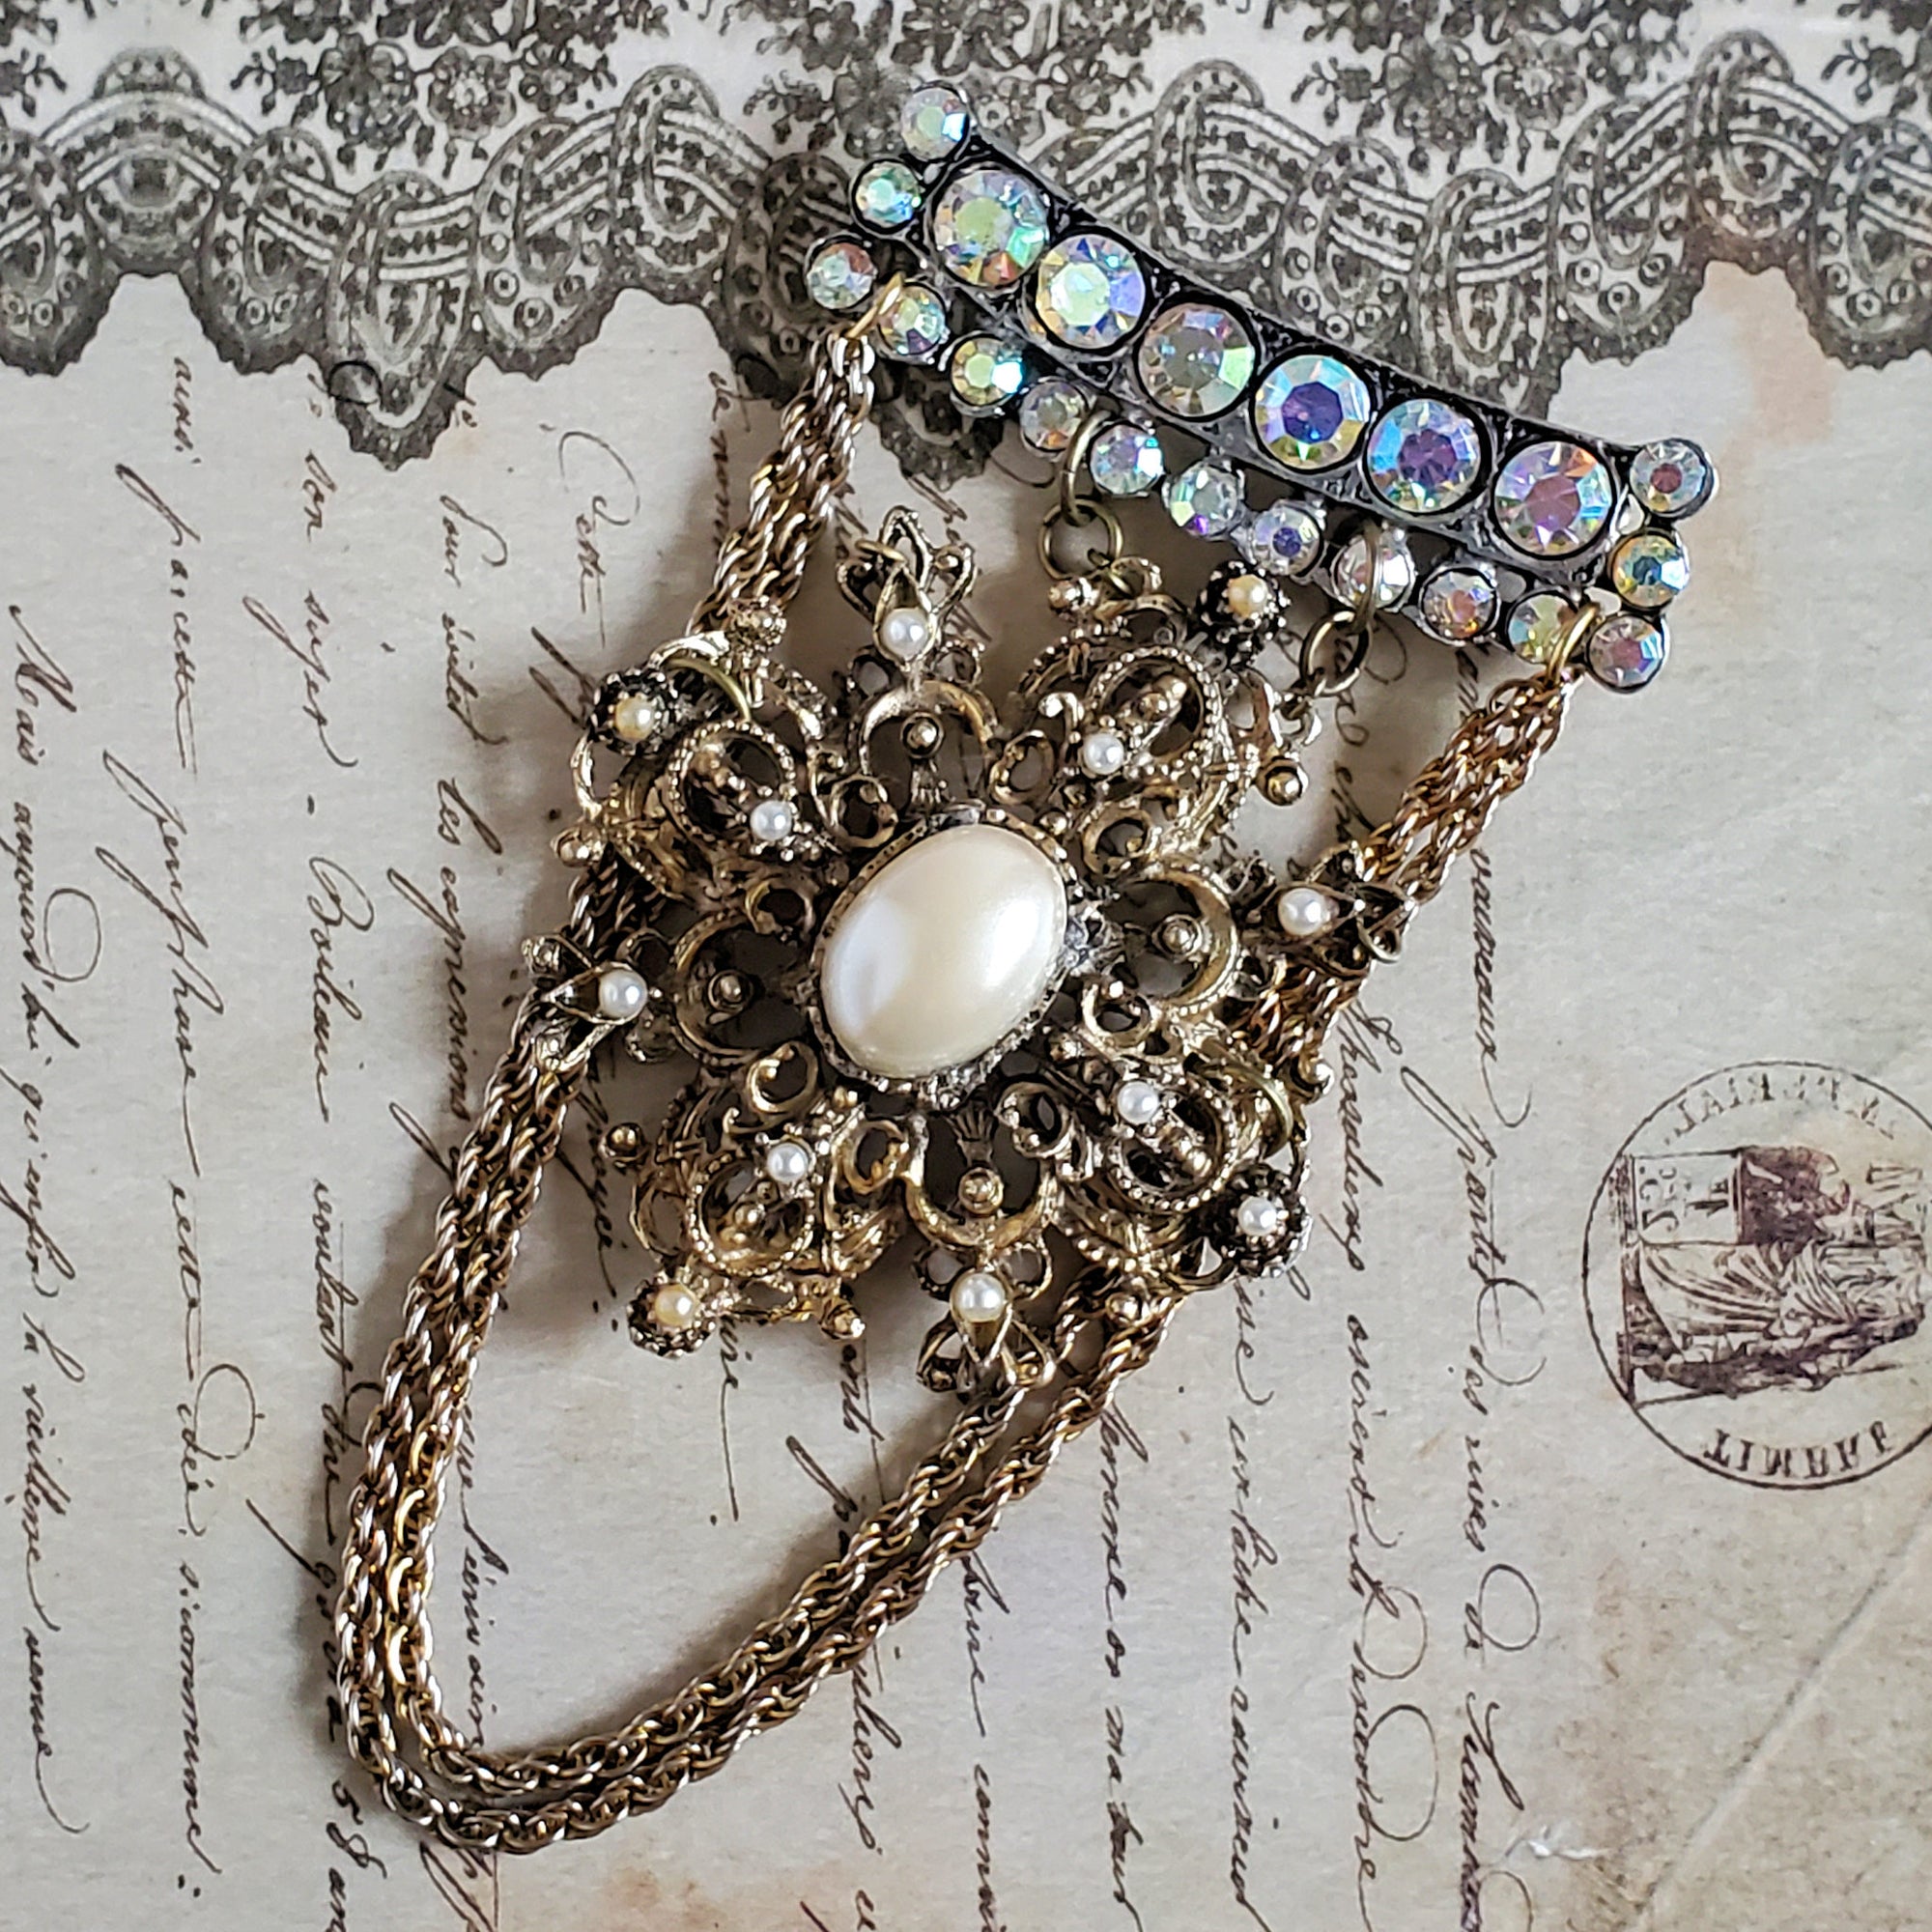 Victorian Style Brooch with a Sparkling topper bar pin , Victoria Cross style pendant and finished with a vintage chain swag.